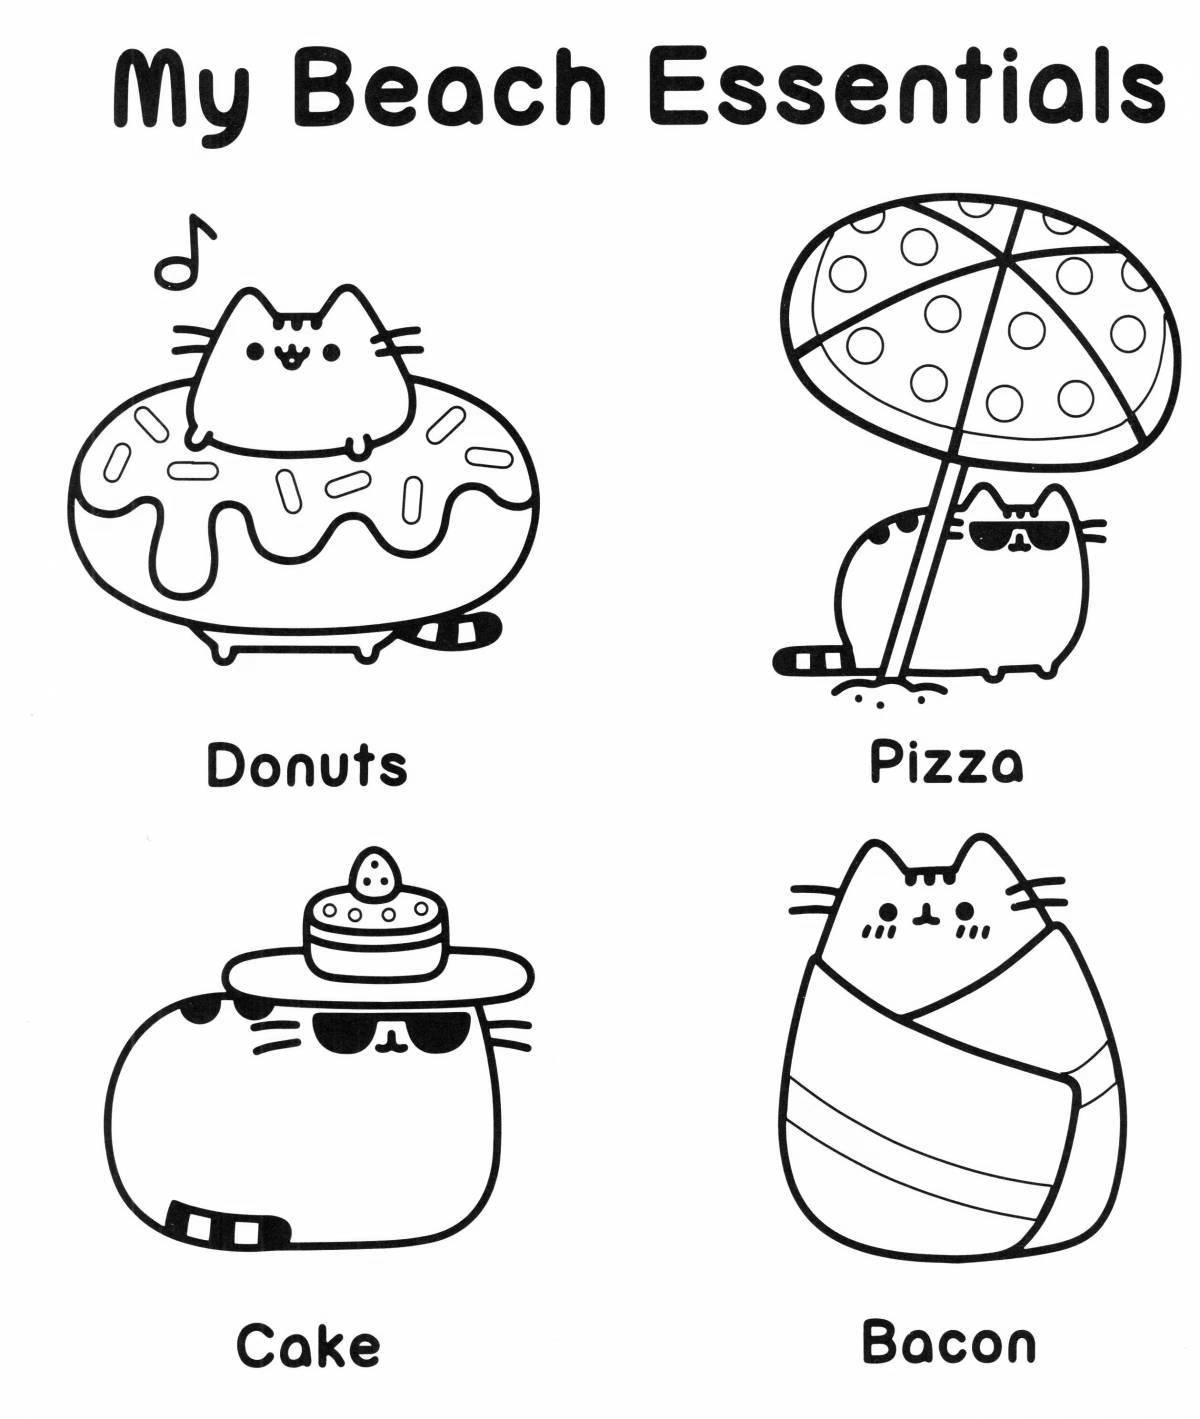 Amuses pusheen with food